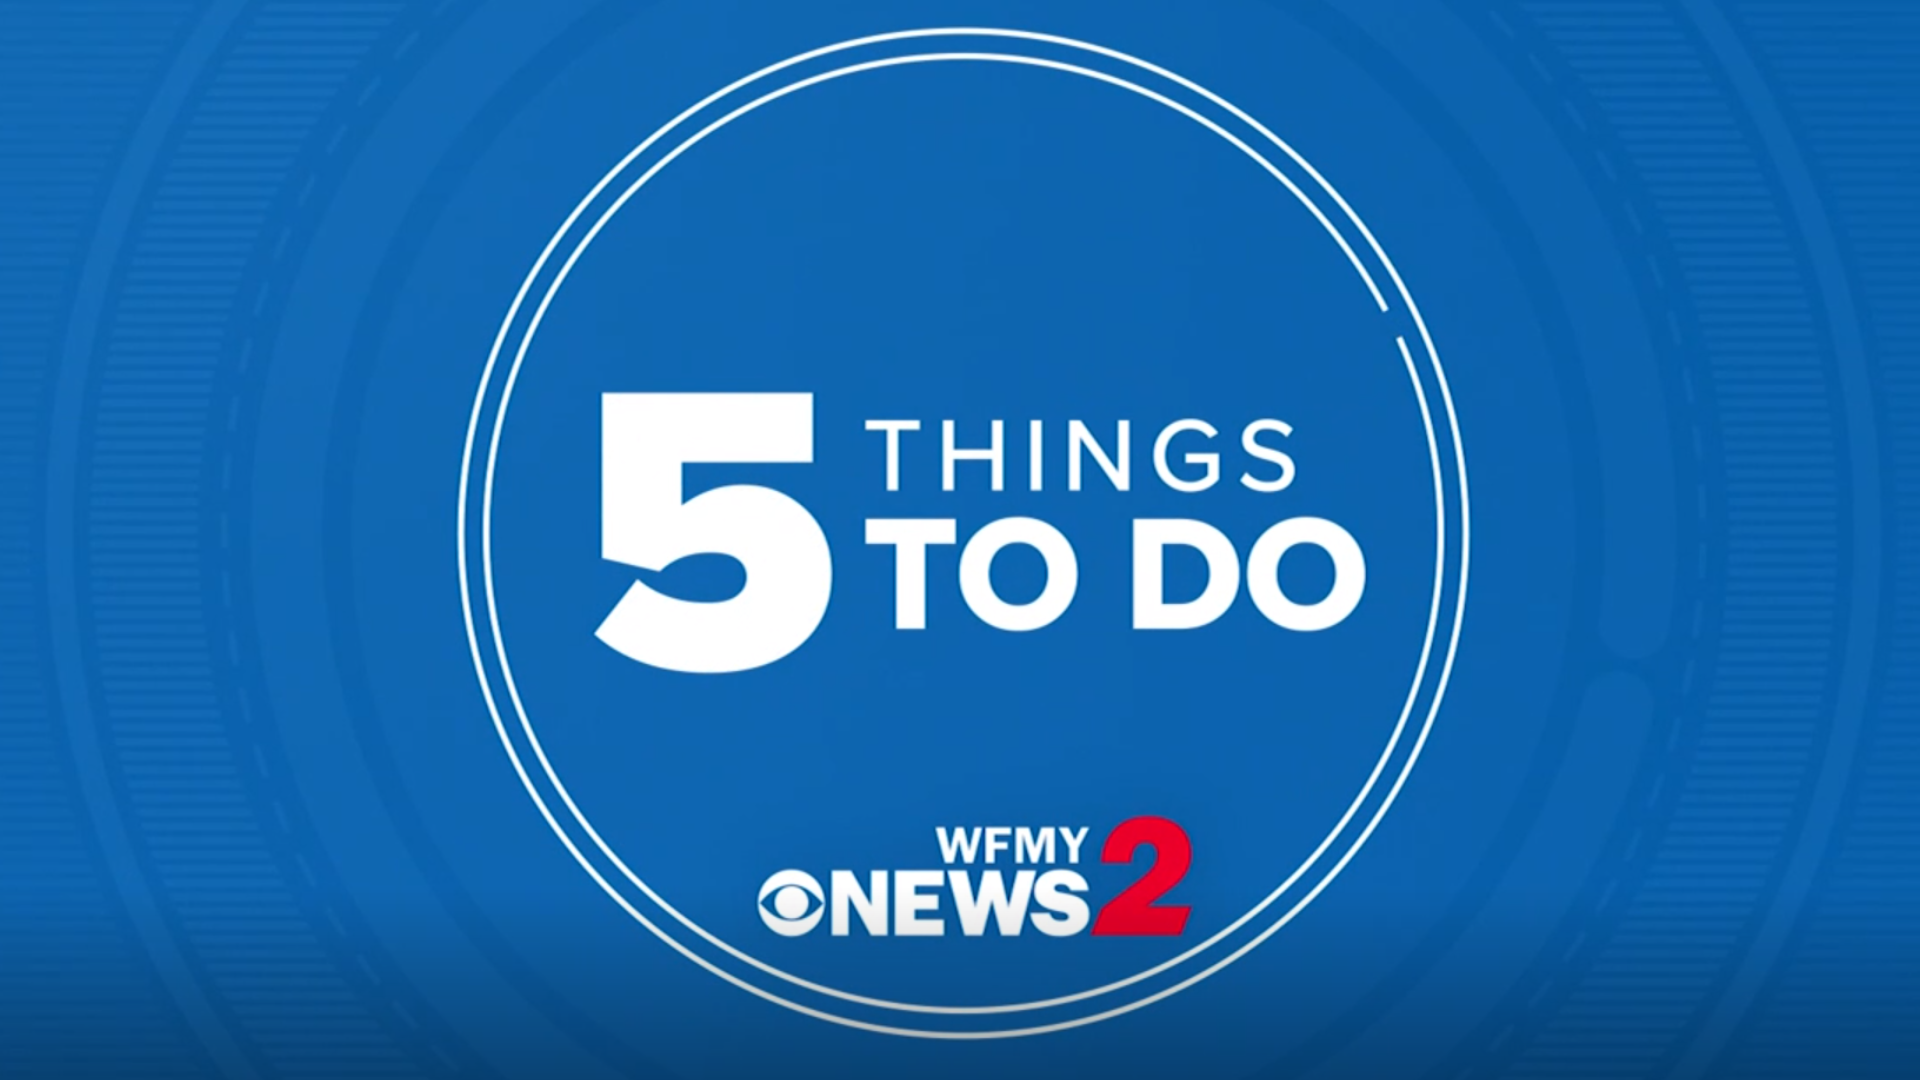 SPEAKERS UP! Searching for some cool things to do this weekend in the Triad? You've come to the right place! So much happening the weekend of June 22-23--let's get 2 it!